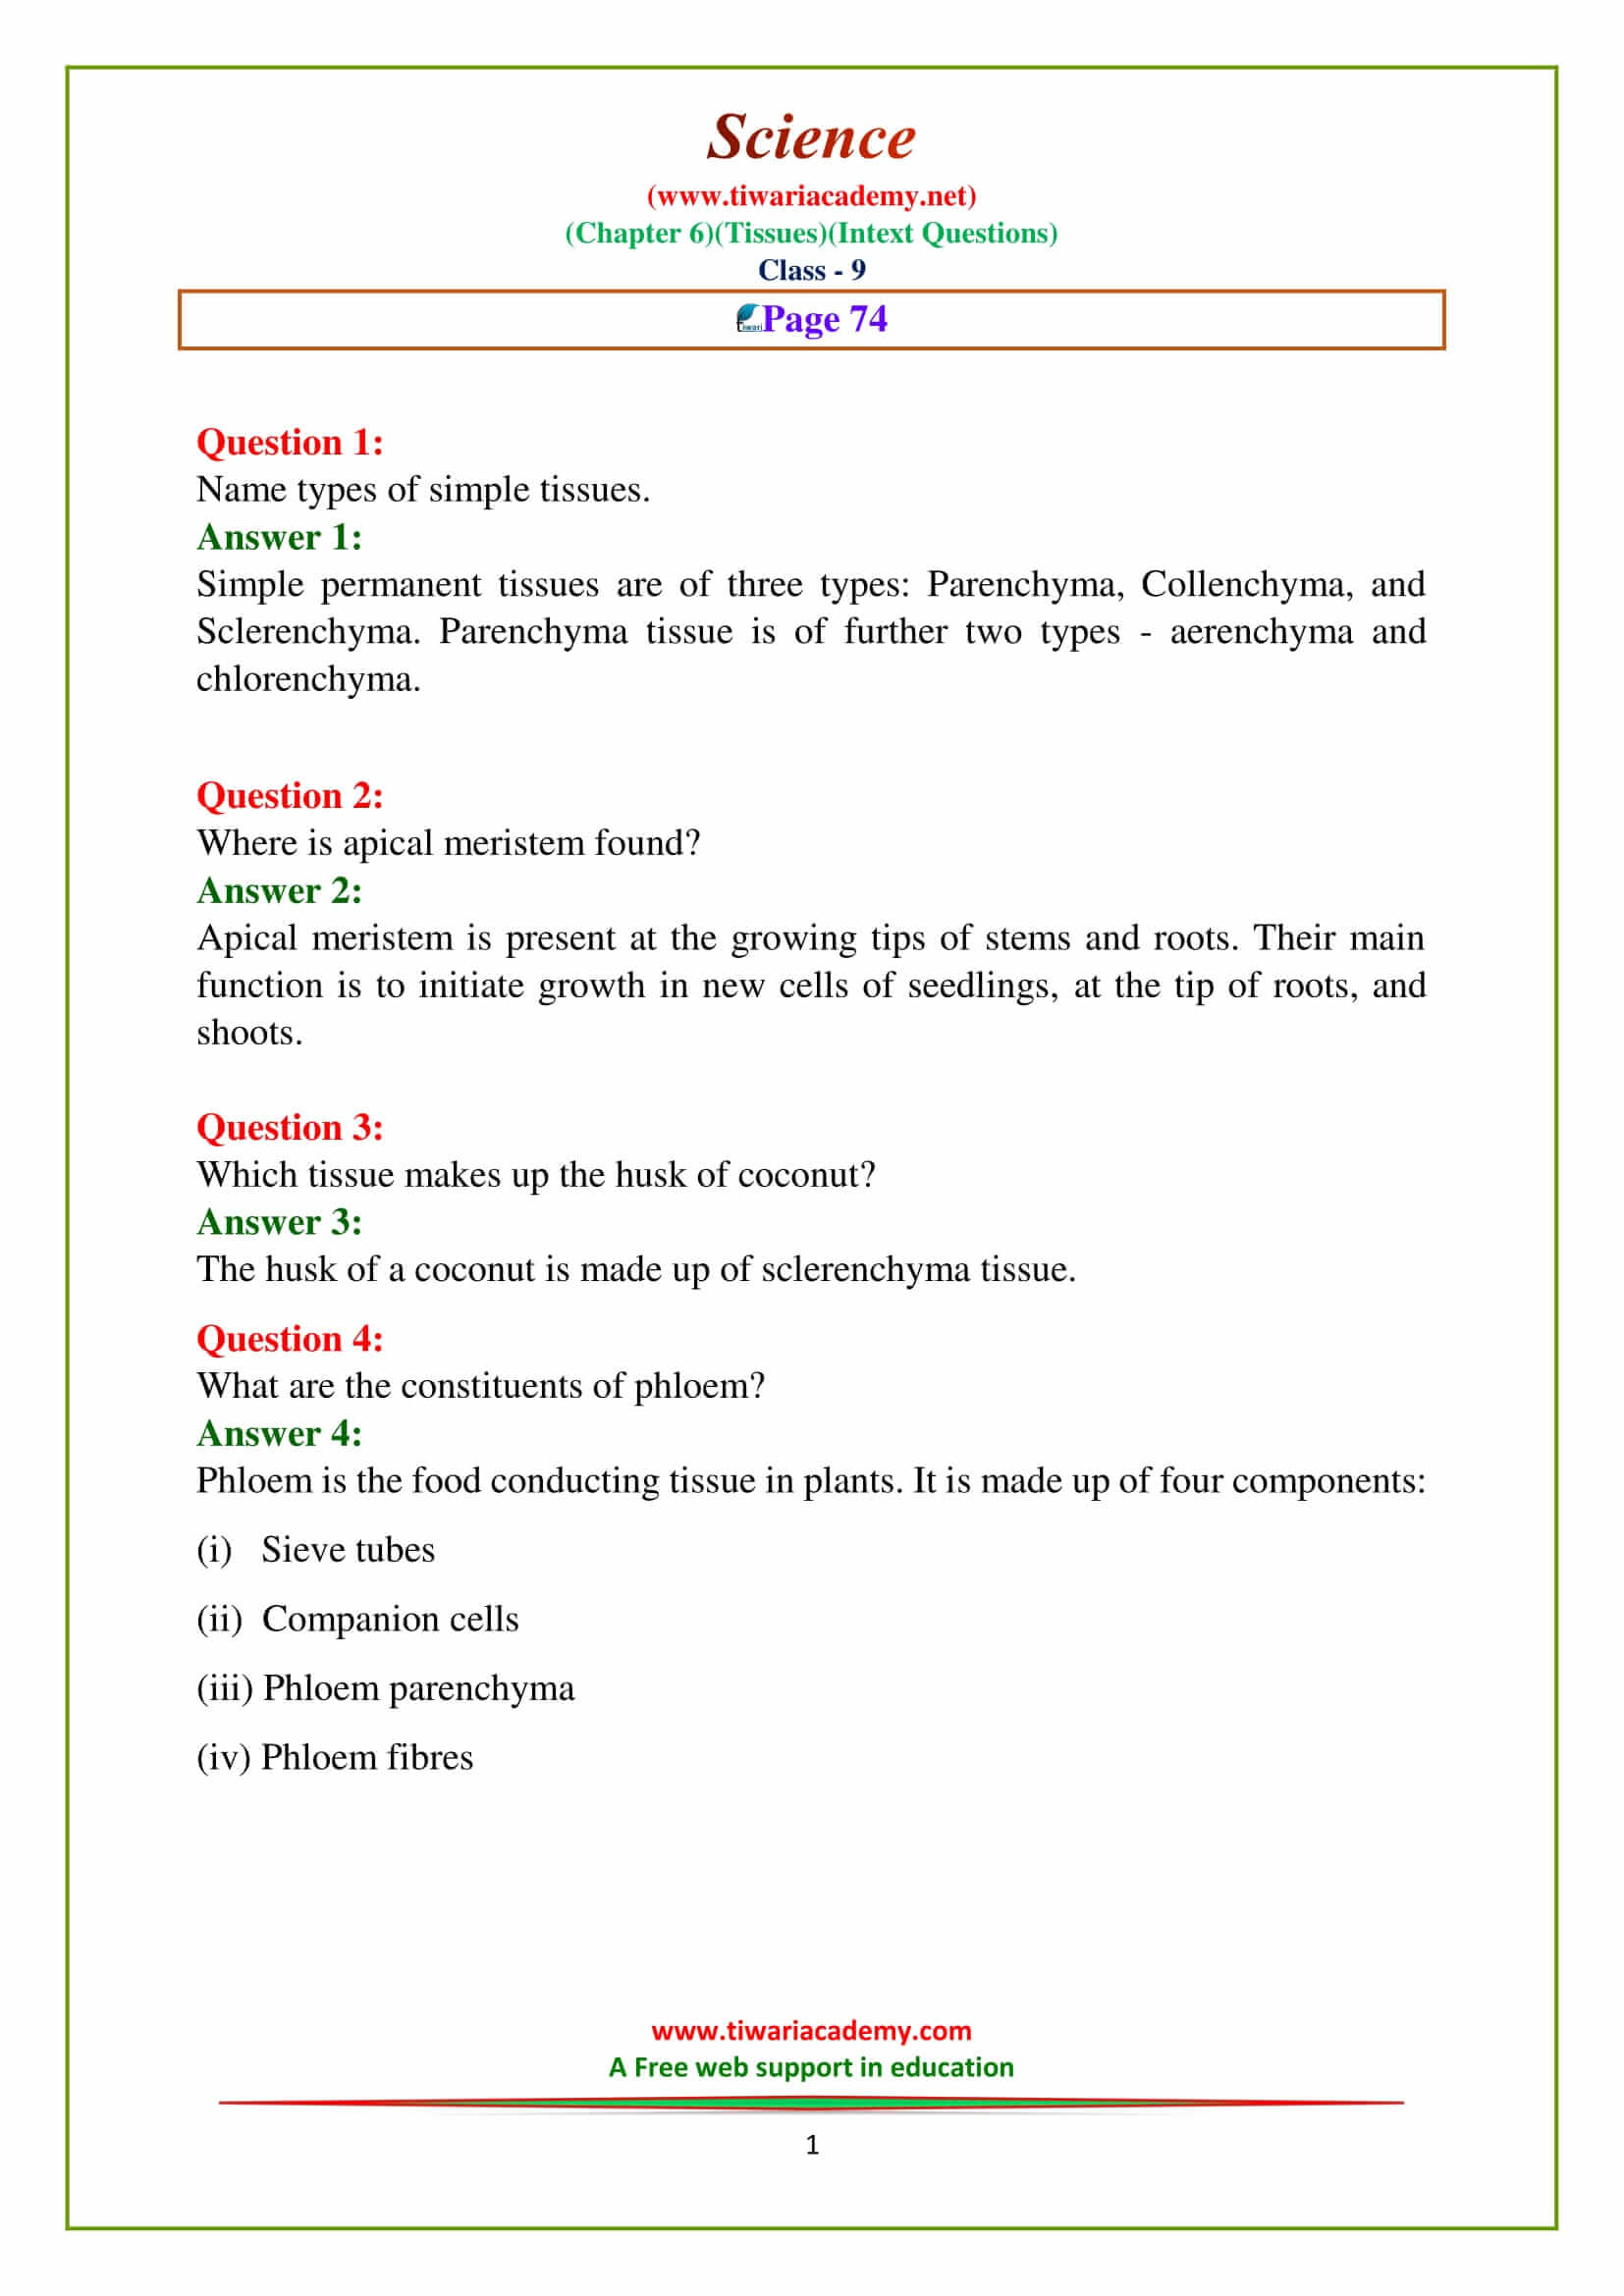 NCERT Solutions for Class 9 Science Chapter 6 Tissues Intext Questions of Page 74